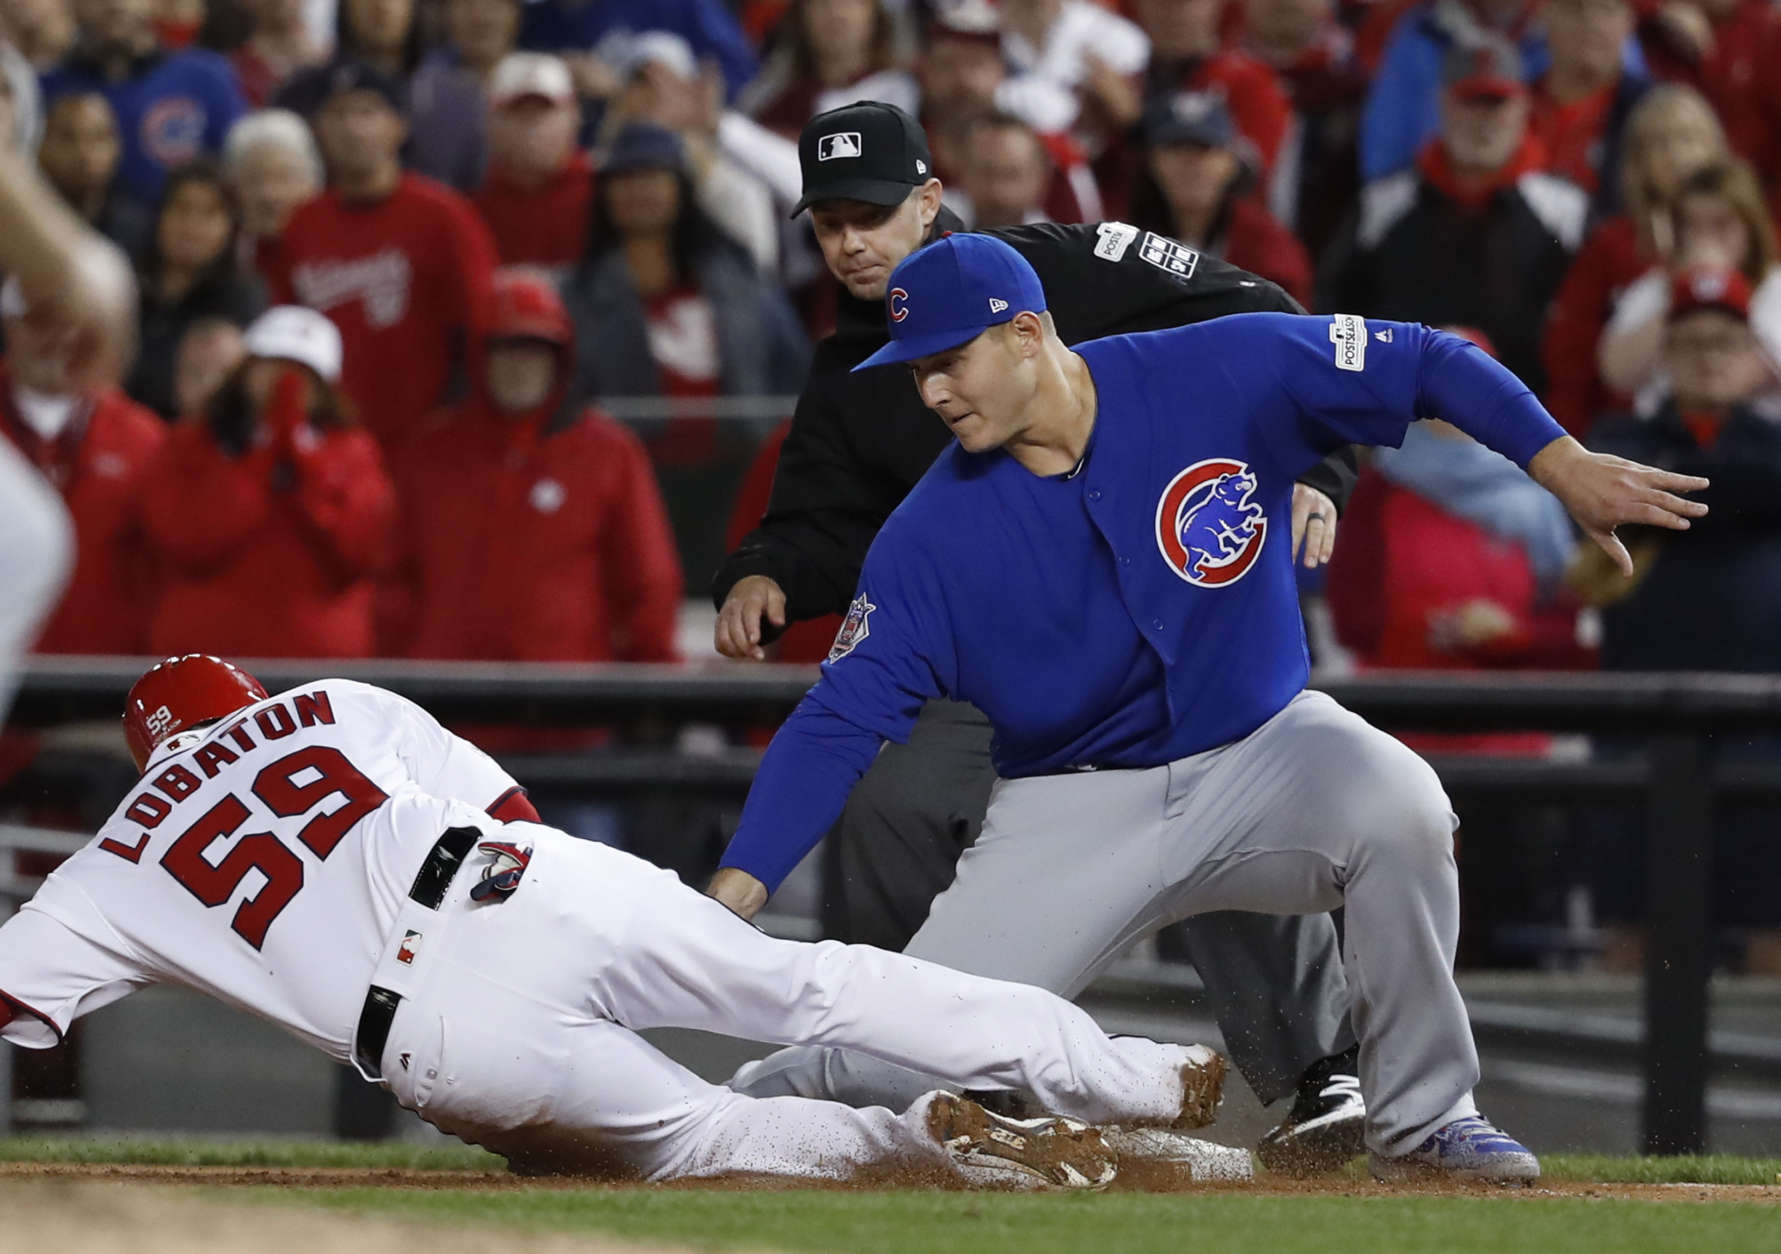 Cubs notebook: Mike Montgomery defends Willson Contreras on game-ending  wild pitch - The Athletic